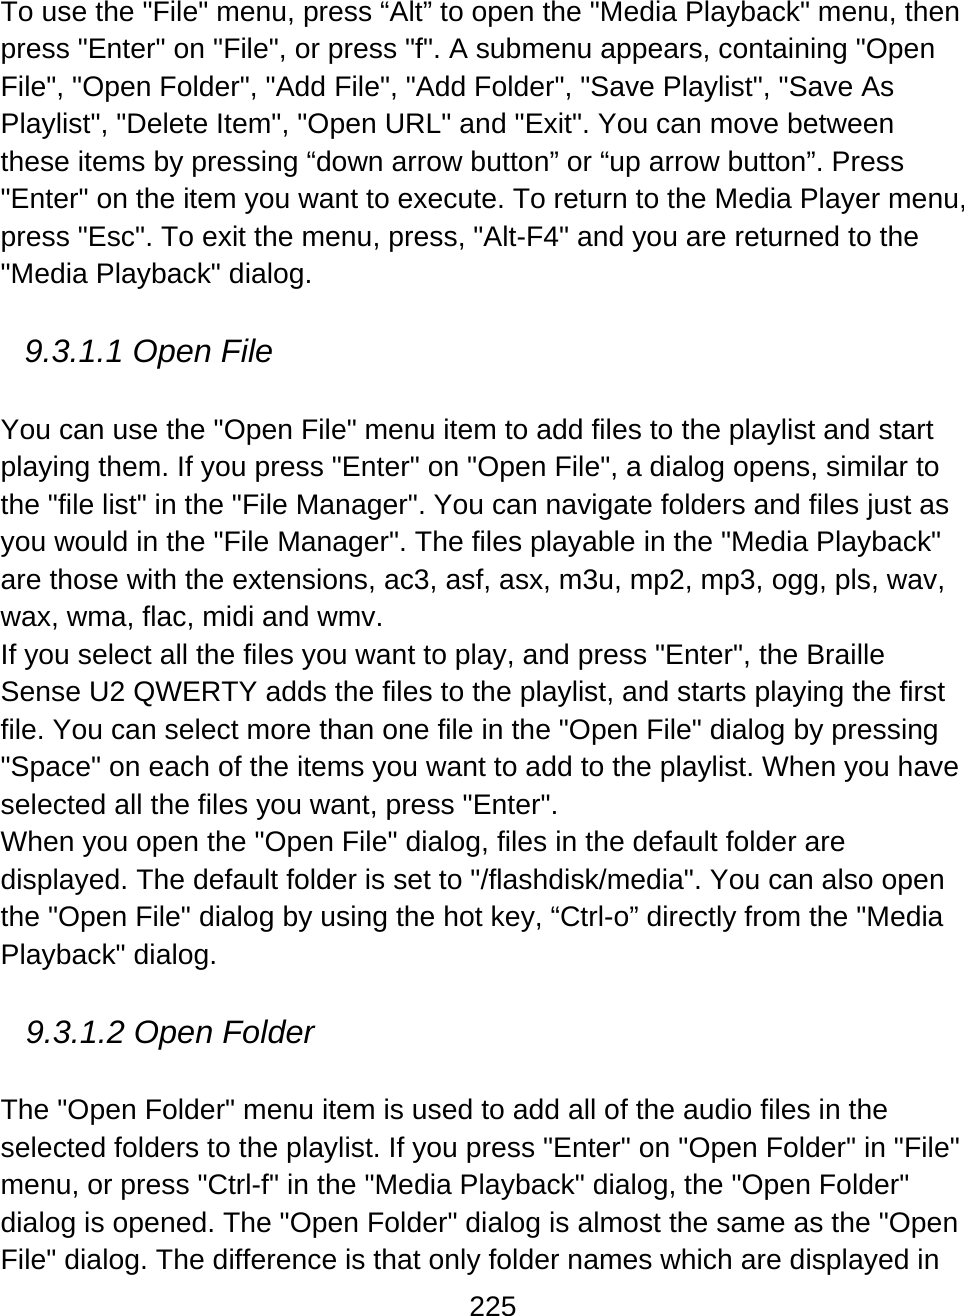 225  To use the &quot;File&quot; menu, press “Alt” to open the &quot;Media Playback&quot; menu, then press &quot;Enter&quot; on &quot;File&quot;, or press &quot;f&quot;. A submenu appears, containing &quot;Open File&quot;, &quot;Open Folder&quot;, &quot;Add File&quot;, &quot;Add Folder&quot;, &quot;Save Playlist&quot;, &quot;Save As Playlist&quot;, &quot;Delete Item&quot;, &quot;Open URL&quot; and &quot;Exit&quot;. You can move between these items by pressing “down arrow button” or “up arrow button”. Press &quot;Enter&quot; on the item you want to execute. To return to the Media Player menu, press &quot;Esc&quot;. To exit the menu, press, &quot;Alt-F4&quot; and you are returned to the &quot;Media Playback&quot; dialog.  9.3.1.1 Open File  You can use the &quot;Open File&quot; menu item to add files to the playlist and start playing them. If you press &quot;Enter&quot; on &quot;Open File&quot;, a dialog opens, similar to the &quot;file list&quot; in the &quot;File Manager&quot;. You can navigate folders and files just as you would in the &quot;File Manager&quot;. The files playable in the &quot;Media Playback&quot; are those with the extensions, ac3, asf, asx, m3u, mp2, mp3, ogg, pls, wav, wax, wma, flac, midi and wmv.  If you select all the files you want to play, and press &quot;Enter&quot;, the Braille Sense U2 QWERTY adds the files to the playlist, and starts playing the first file. You can select more than one file in the &quot;Open File&quot; dialog by pressing &quot;Space&quot; on each of the items you want to add to the playlist. When you have selected all the files you want, press &quot;Enter&quot;.  When you open the &quot;Open File&quot; dialog, files in the default folder are displayed. The default folder is set to &quot;/flashdisk/media&quot;. You can also open the &quot;Open File&quot; dialog by using the hot key, “Ctrl-o” directly from the &quot;Media Playback&quot; dialog.  9.3.1.2 Open Folder  The &quot;Open Folder&quot; menu item is used to add all of the audio files in the selected folders to the playlist. If you press &quot;Enter&quot; on &quot;Open Folder&quot; in &quot;File&quot; menu, or press &quot;Ctrl-f&quot; in the &quot;Media Playback&quot; dialog, the &quot;Open Folder&quot; dialog is opened. The &quot;Open Folder&quot; dialog is almost the same as the &quot;Open File&quot; dialog. The difference is that only folder names which are displayed in 